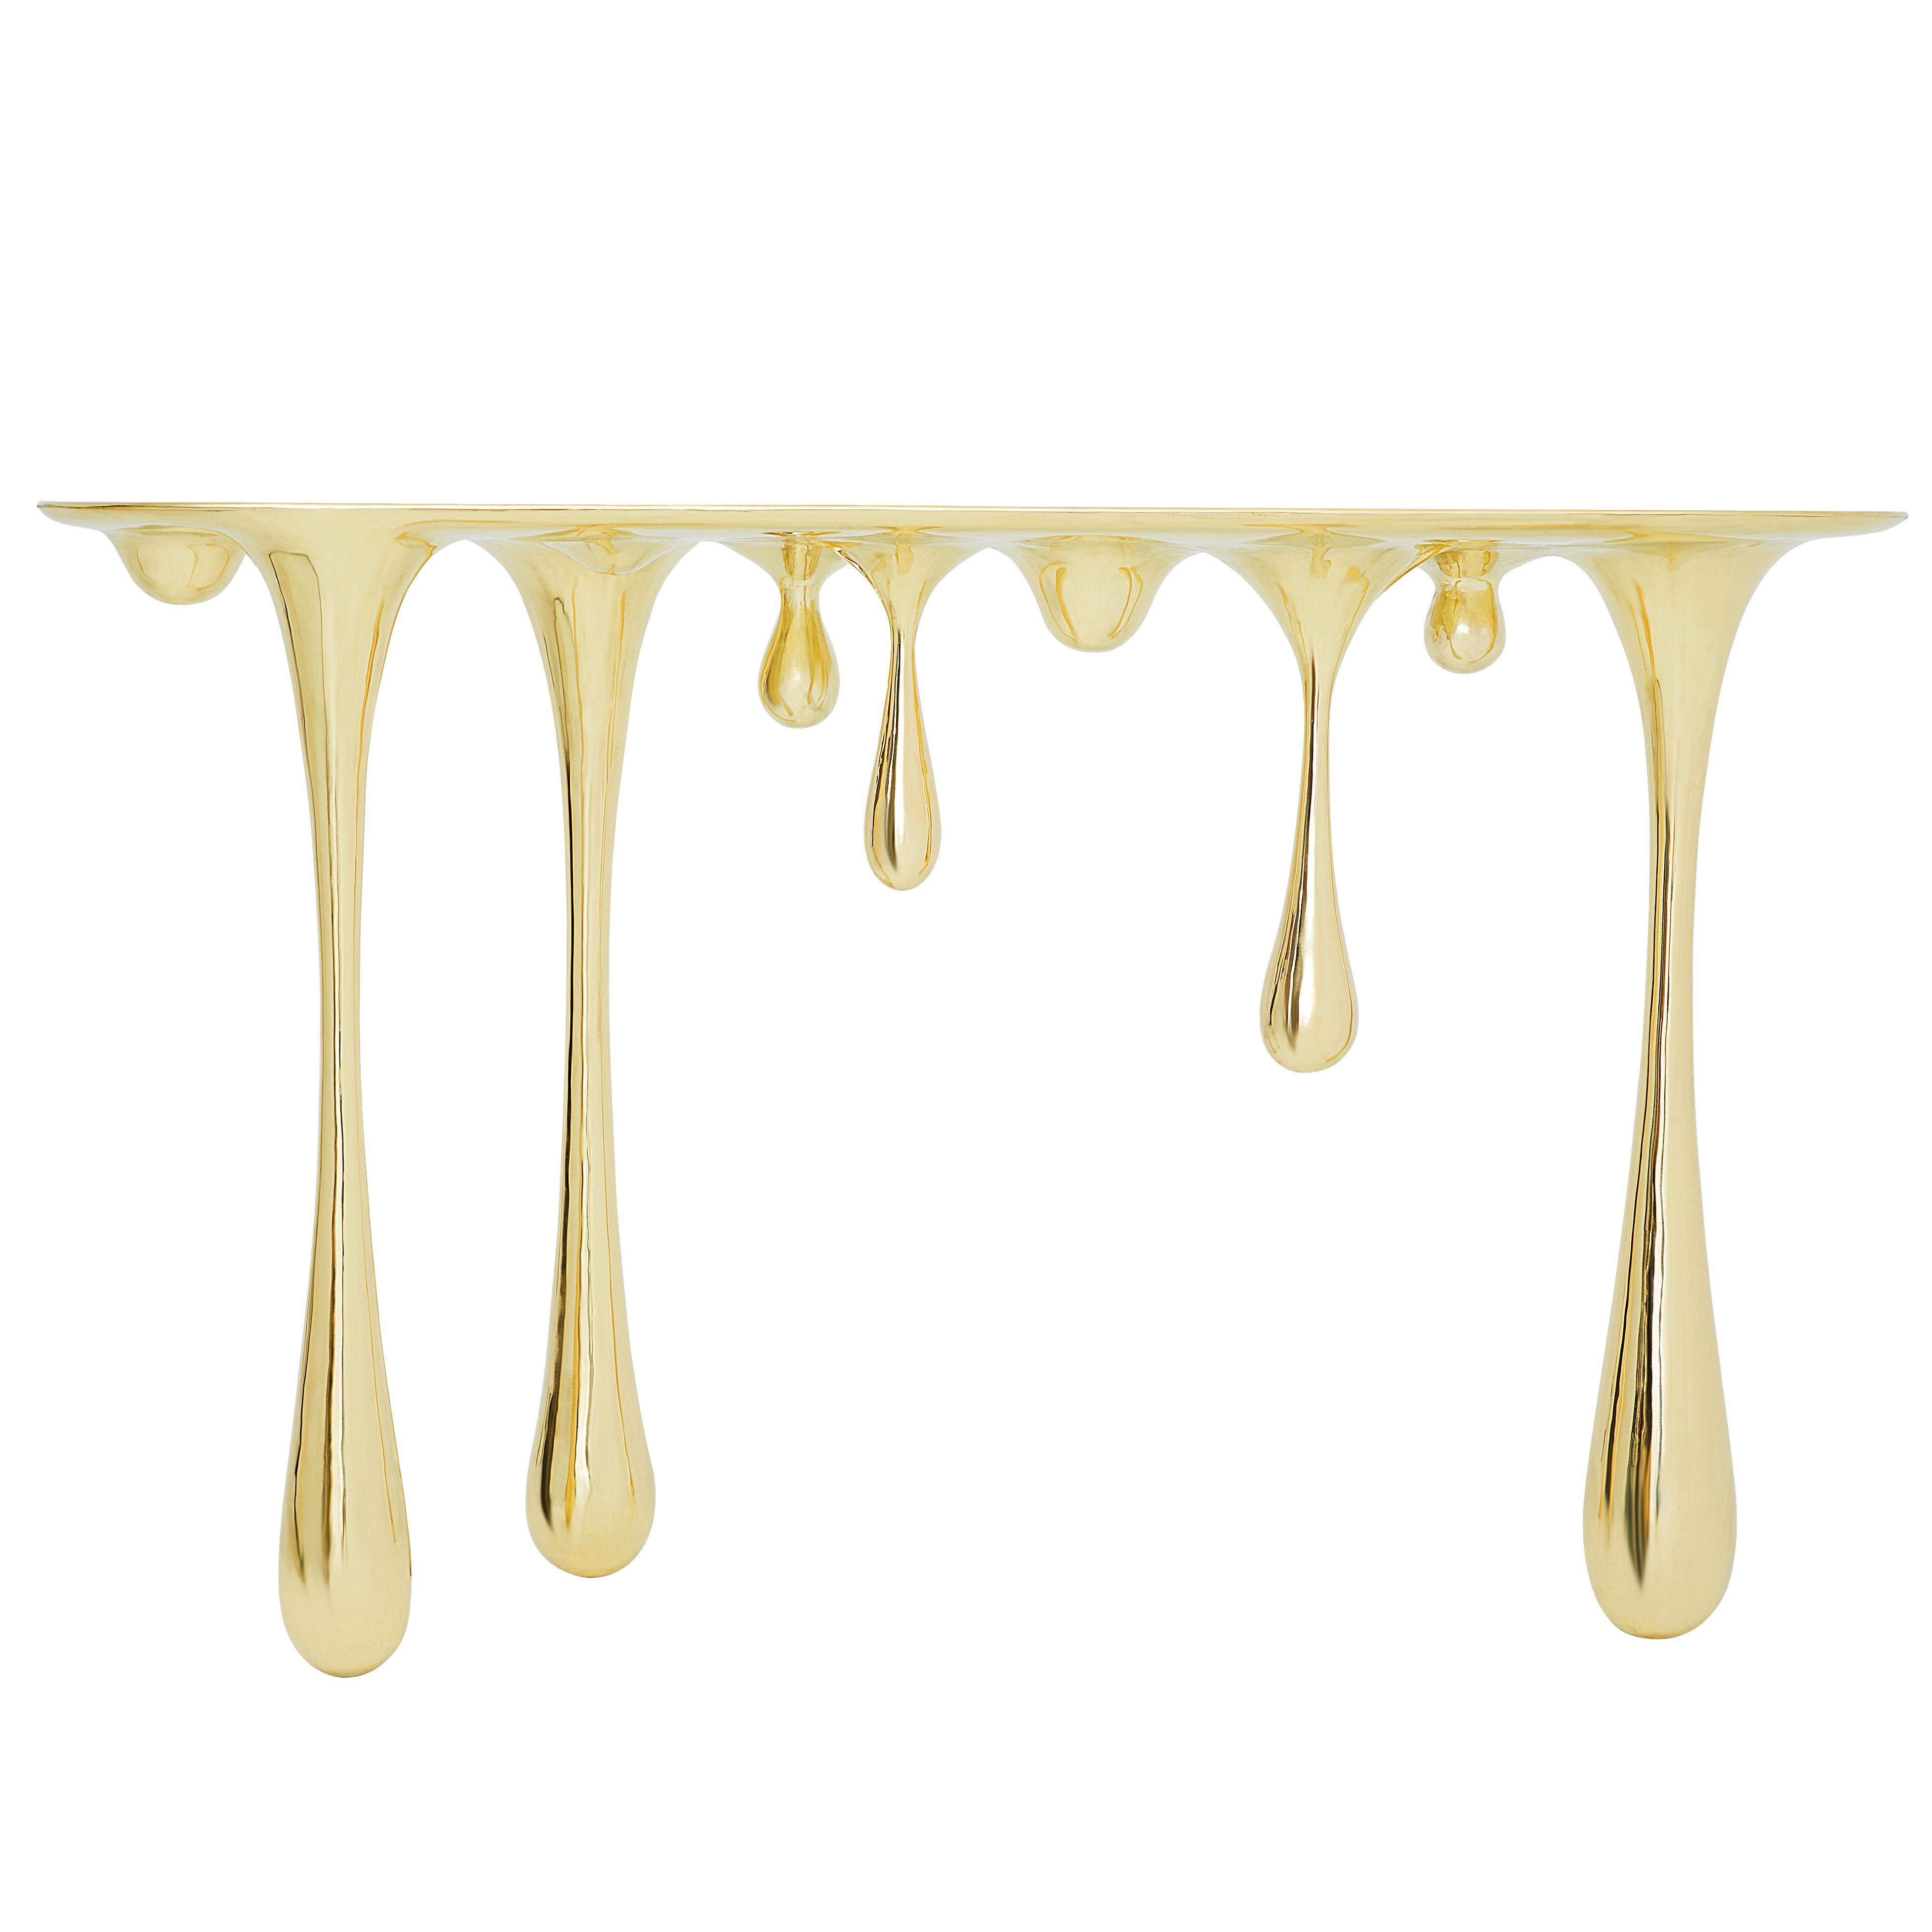 Melting Brass Console Table or Hallway Table by Zhipeng Tan For Sale